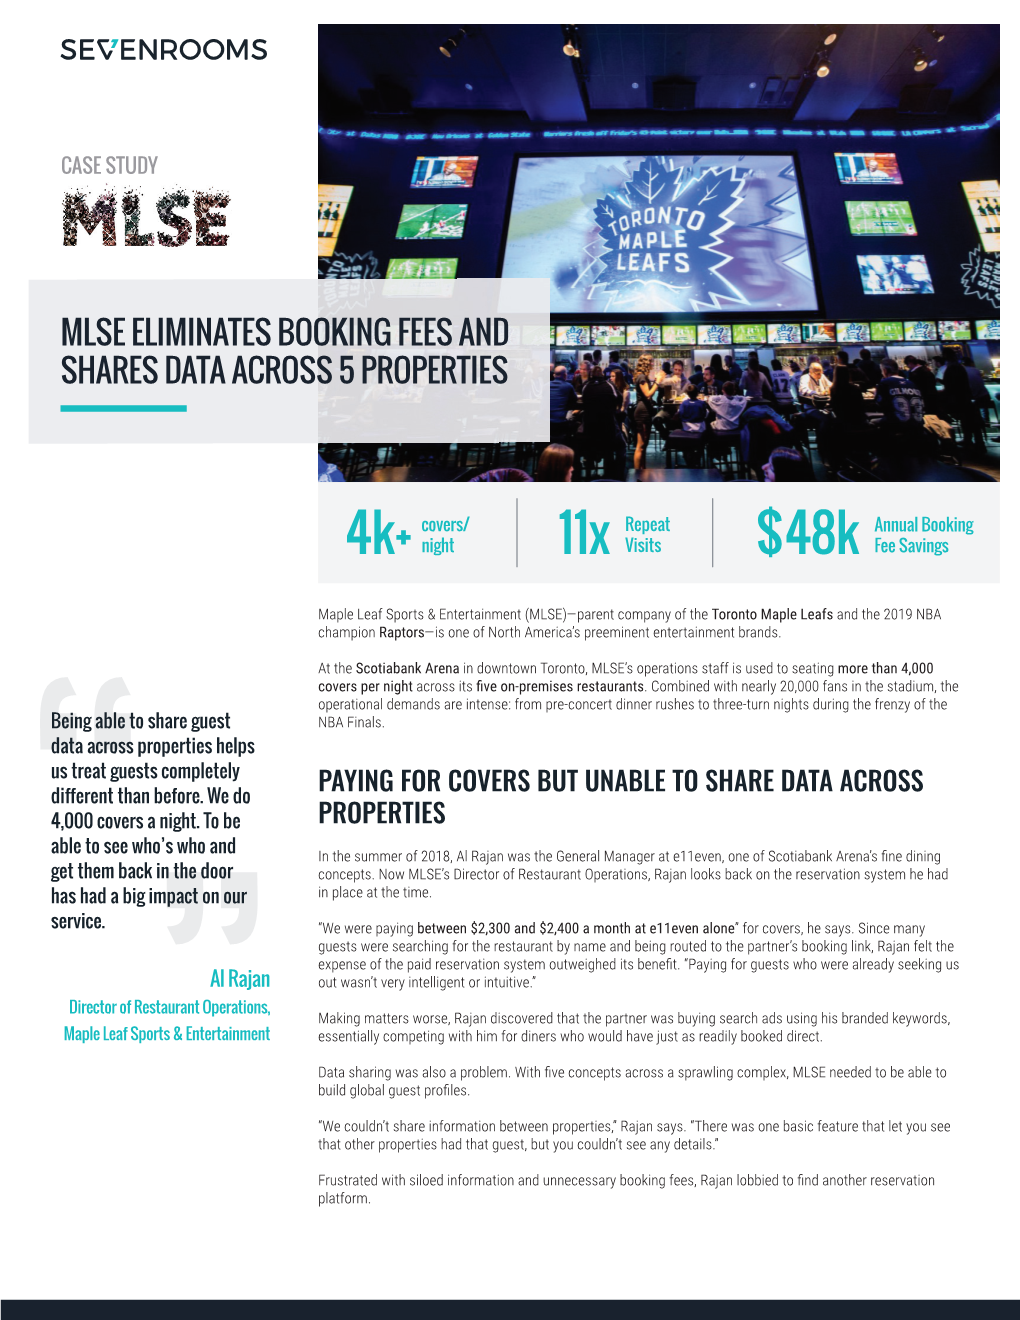 Mlse Eliminates Booking Fees and Shares Data Across 5 Properties